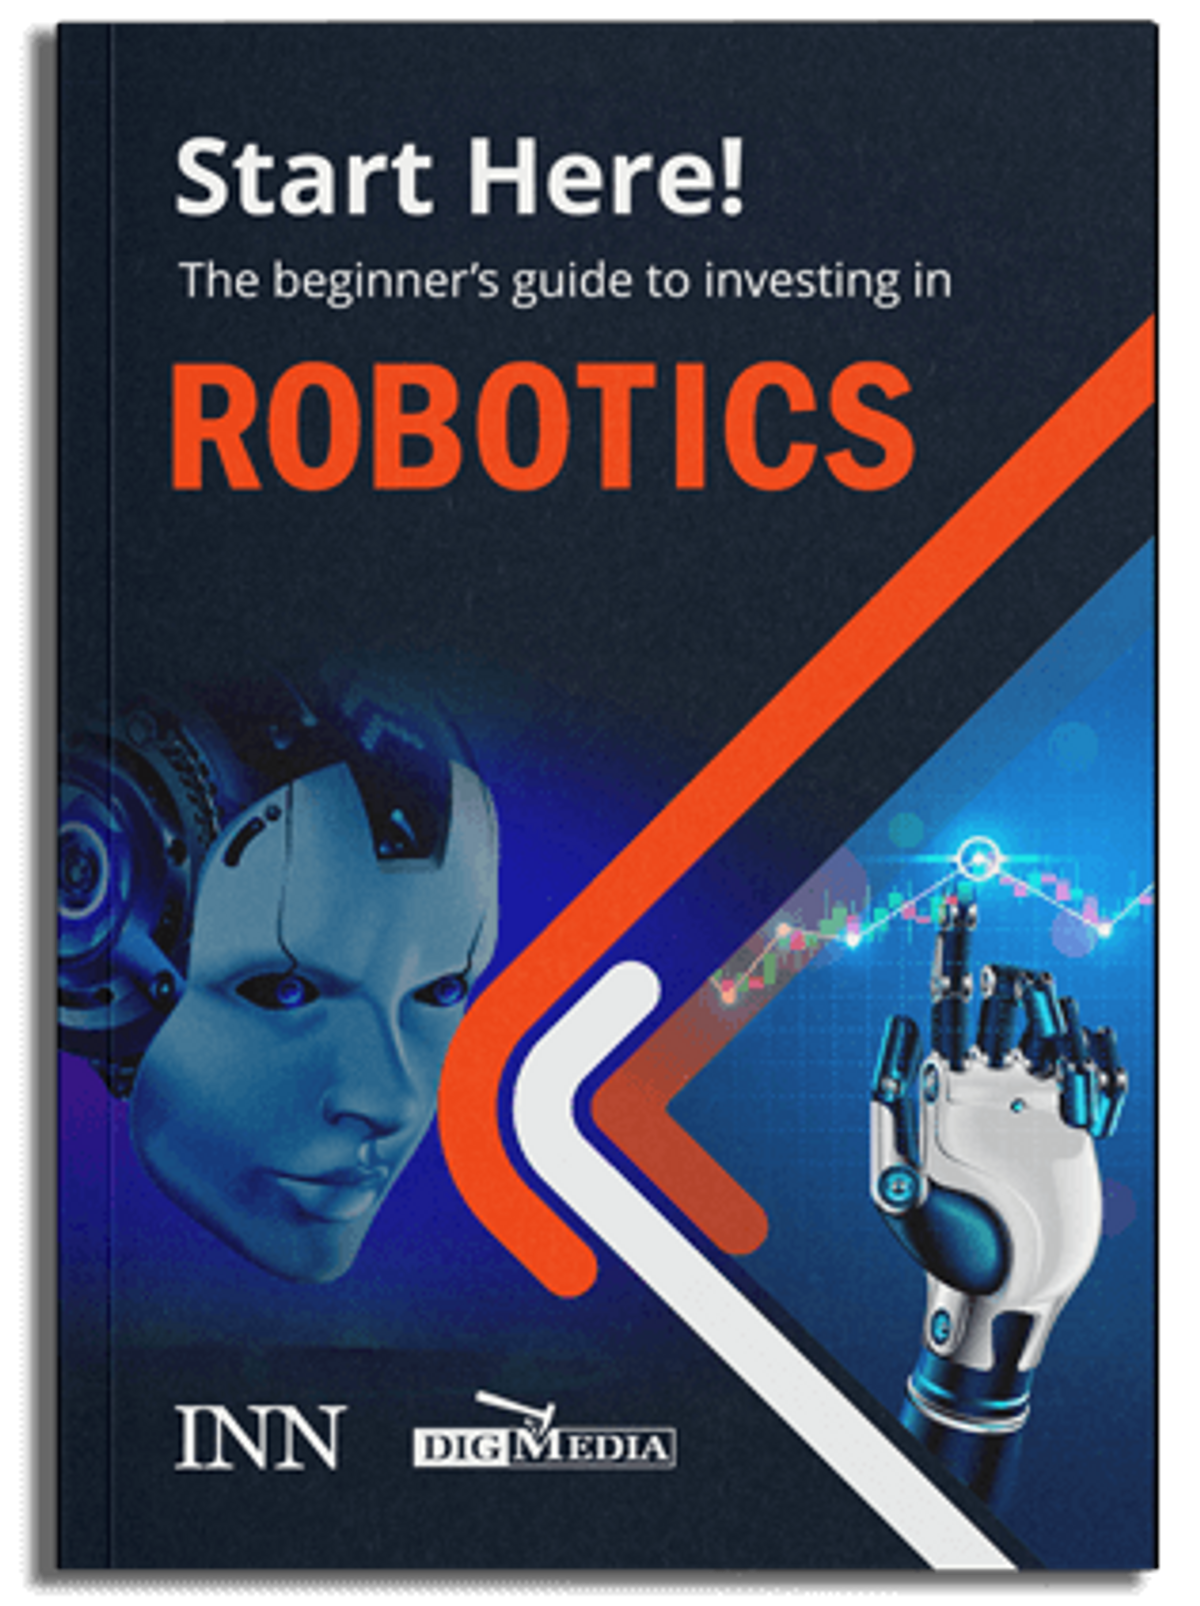  The Beginner's Guide to Investing In Robotics